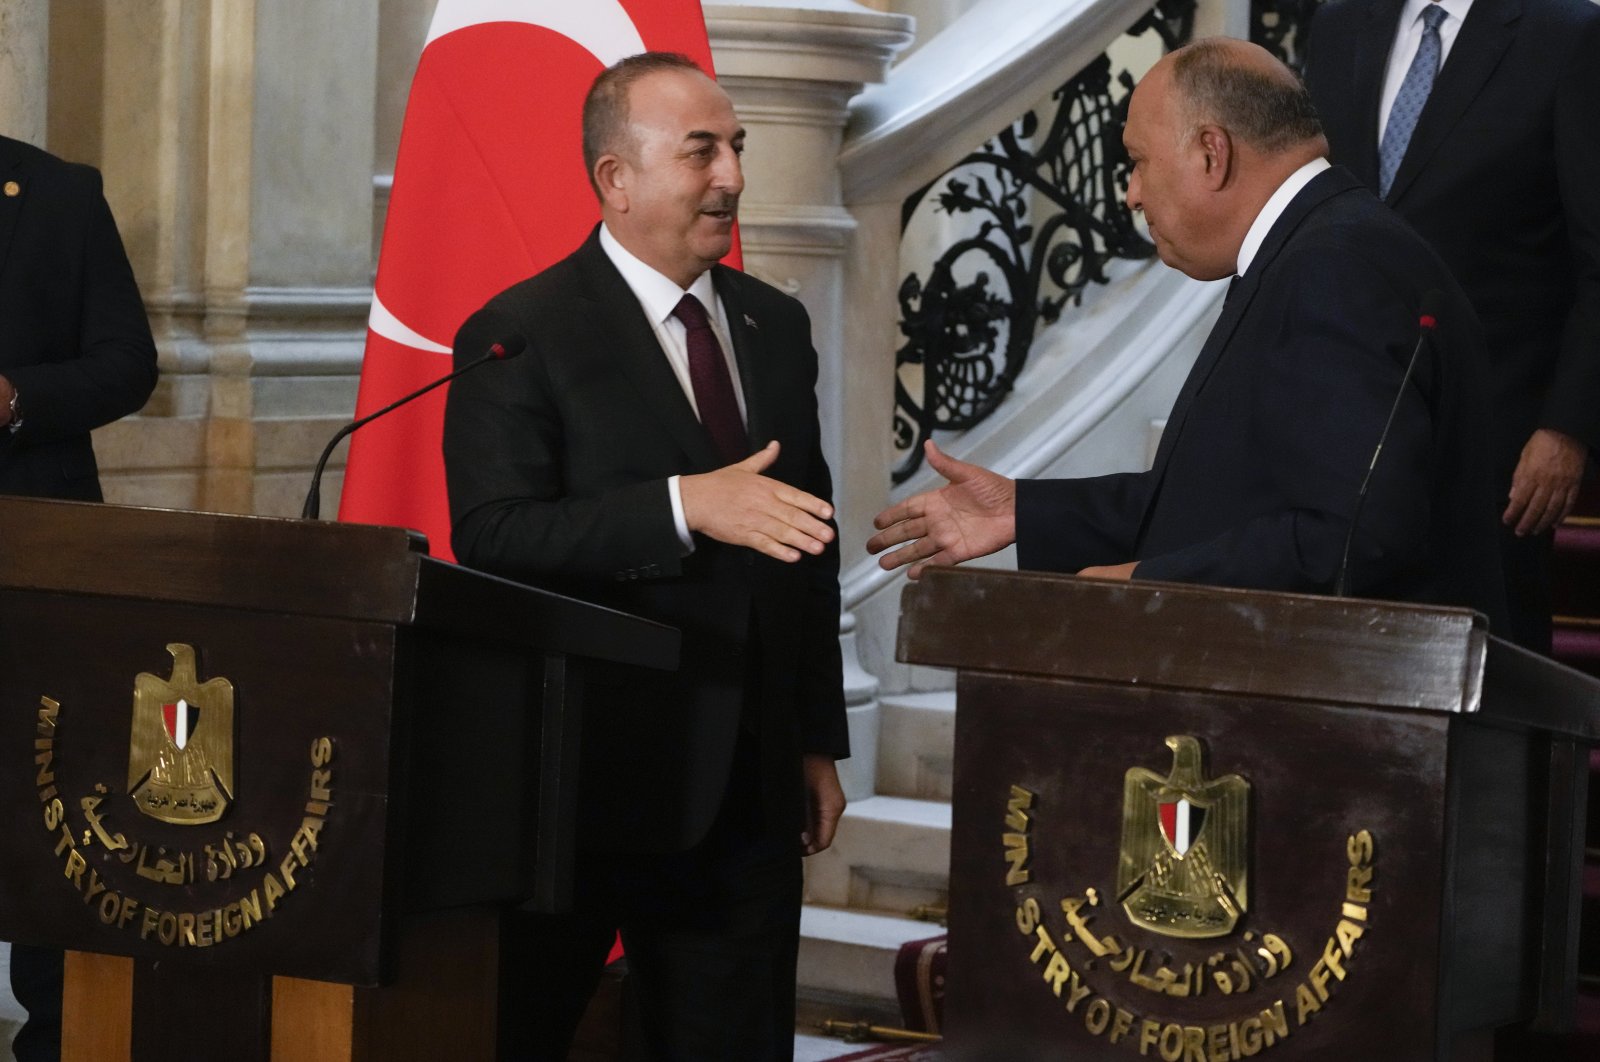 Foreign Minister Mevlüt Çavuşoğlu (L) shakes hands with his Egyptian counterpart Sameh Shoukry after their press conference at Tahrir Palace, Cairo, Egypt, March 18, 2023. (AP Photo)